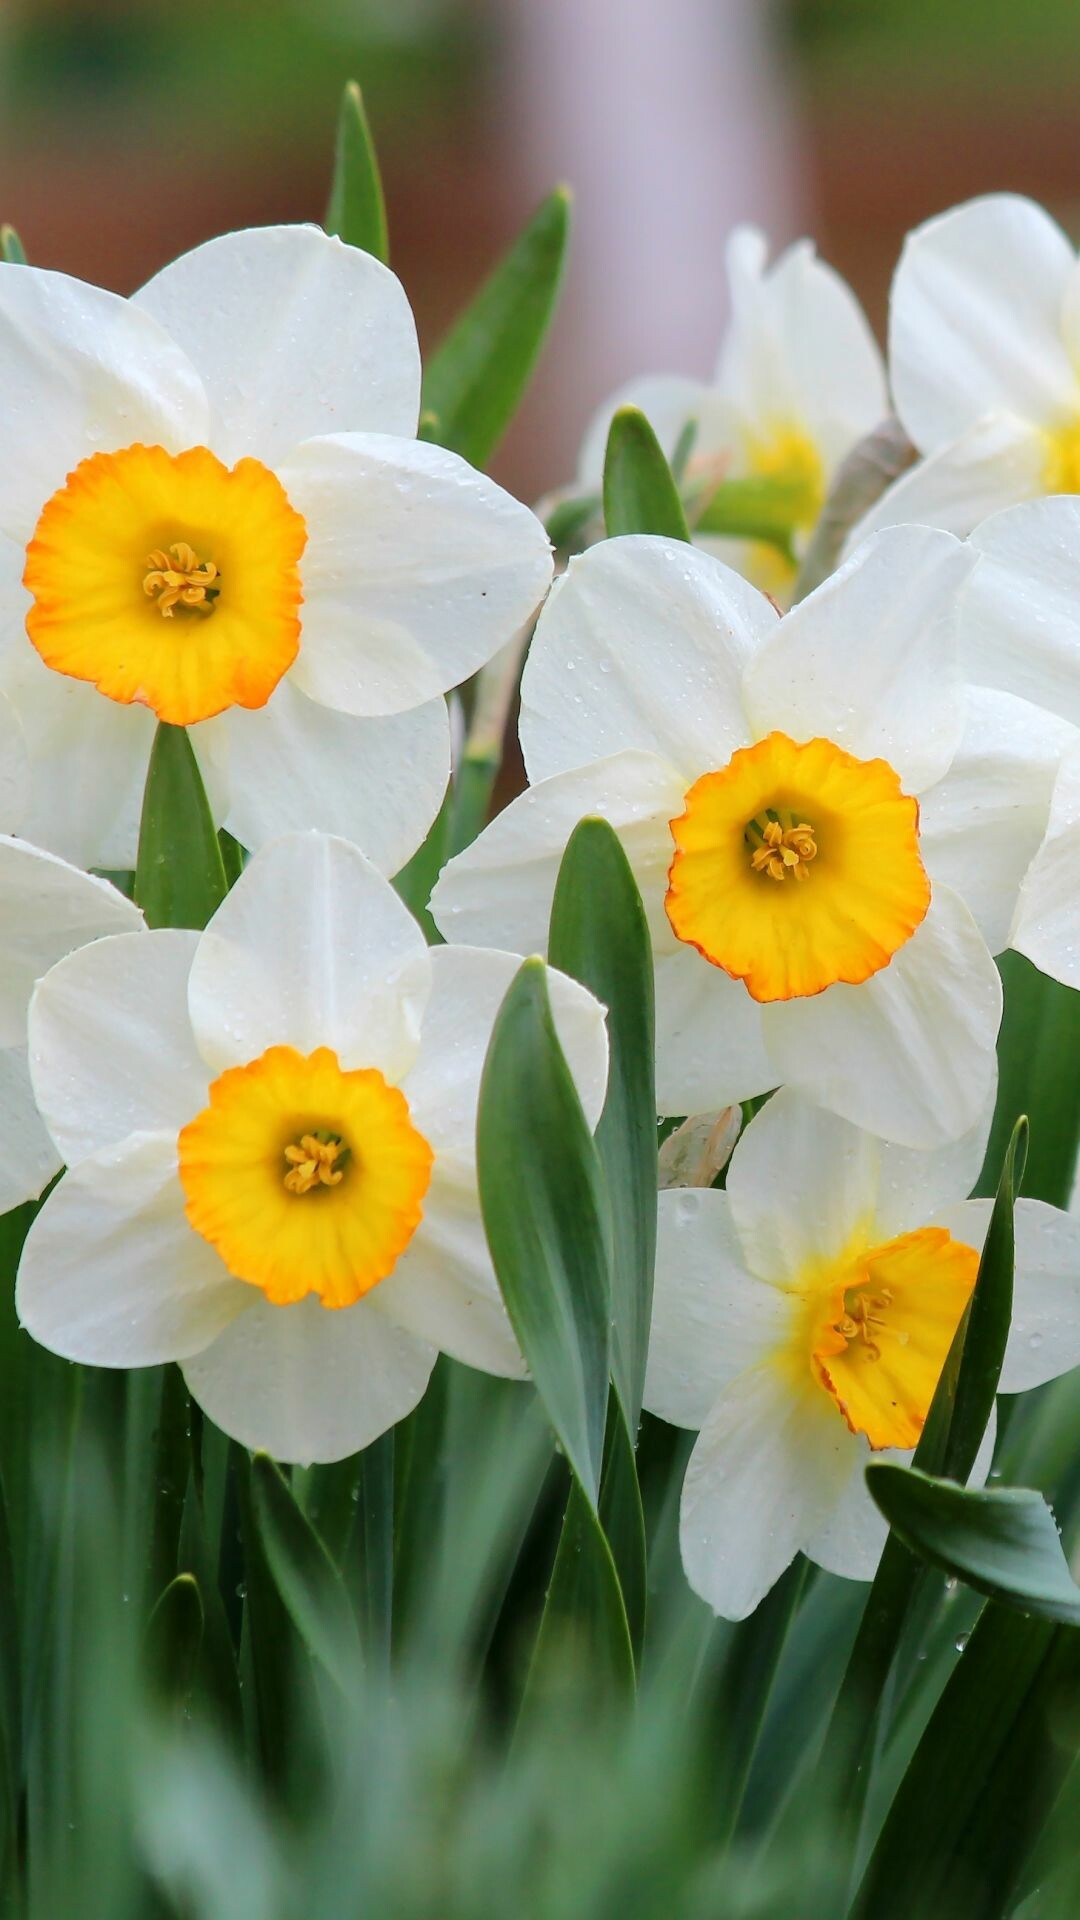 Daffodil: Yellow is the most common color for daffodils, but they also bloom in white, cream, orange, and even pink. 1080x1920 Full HD Wallpaper.